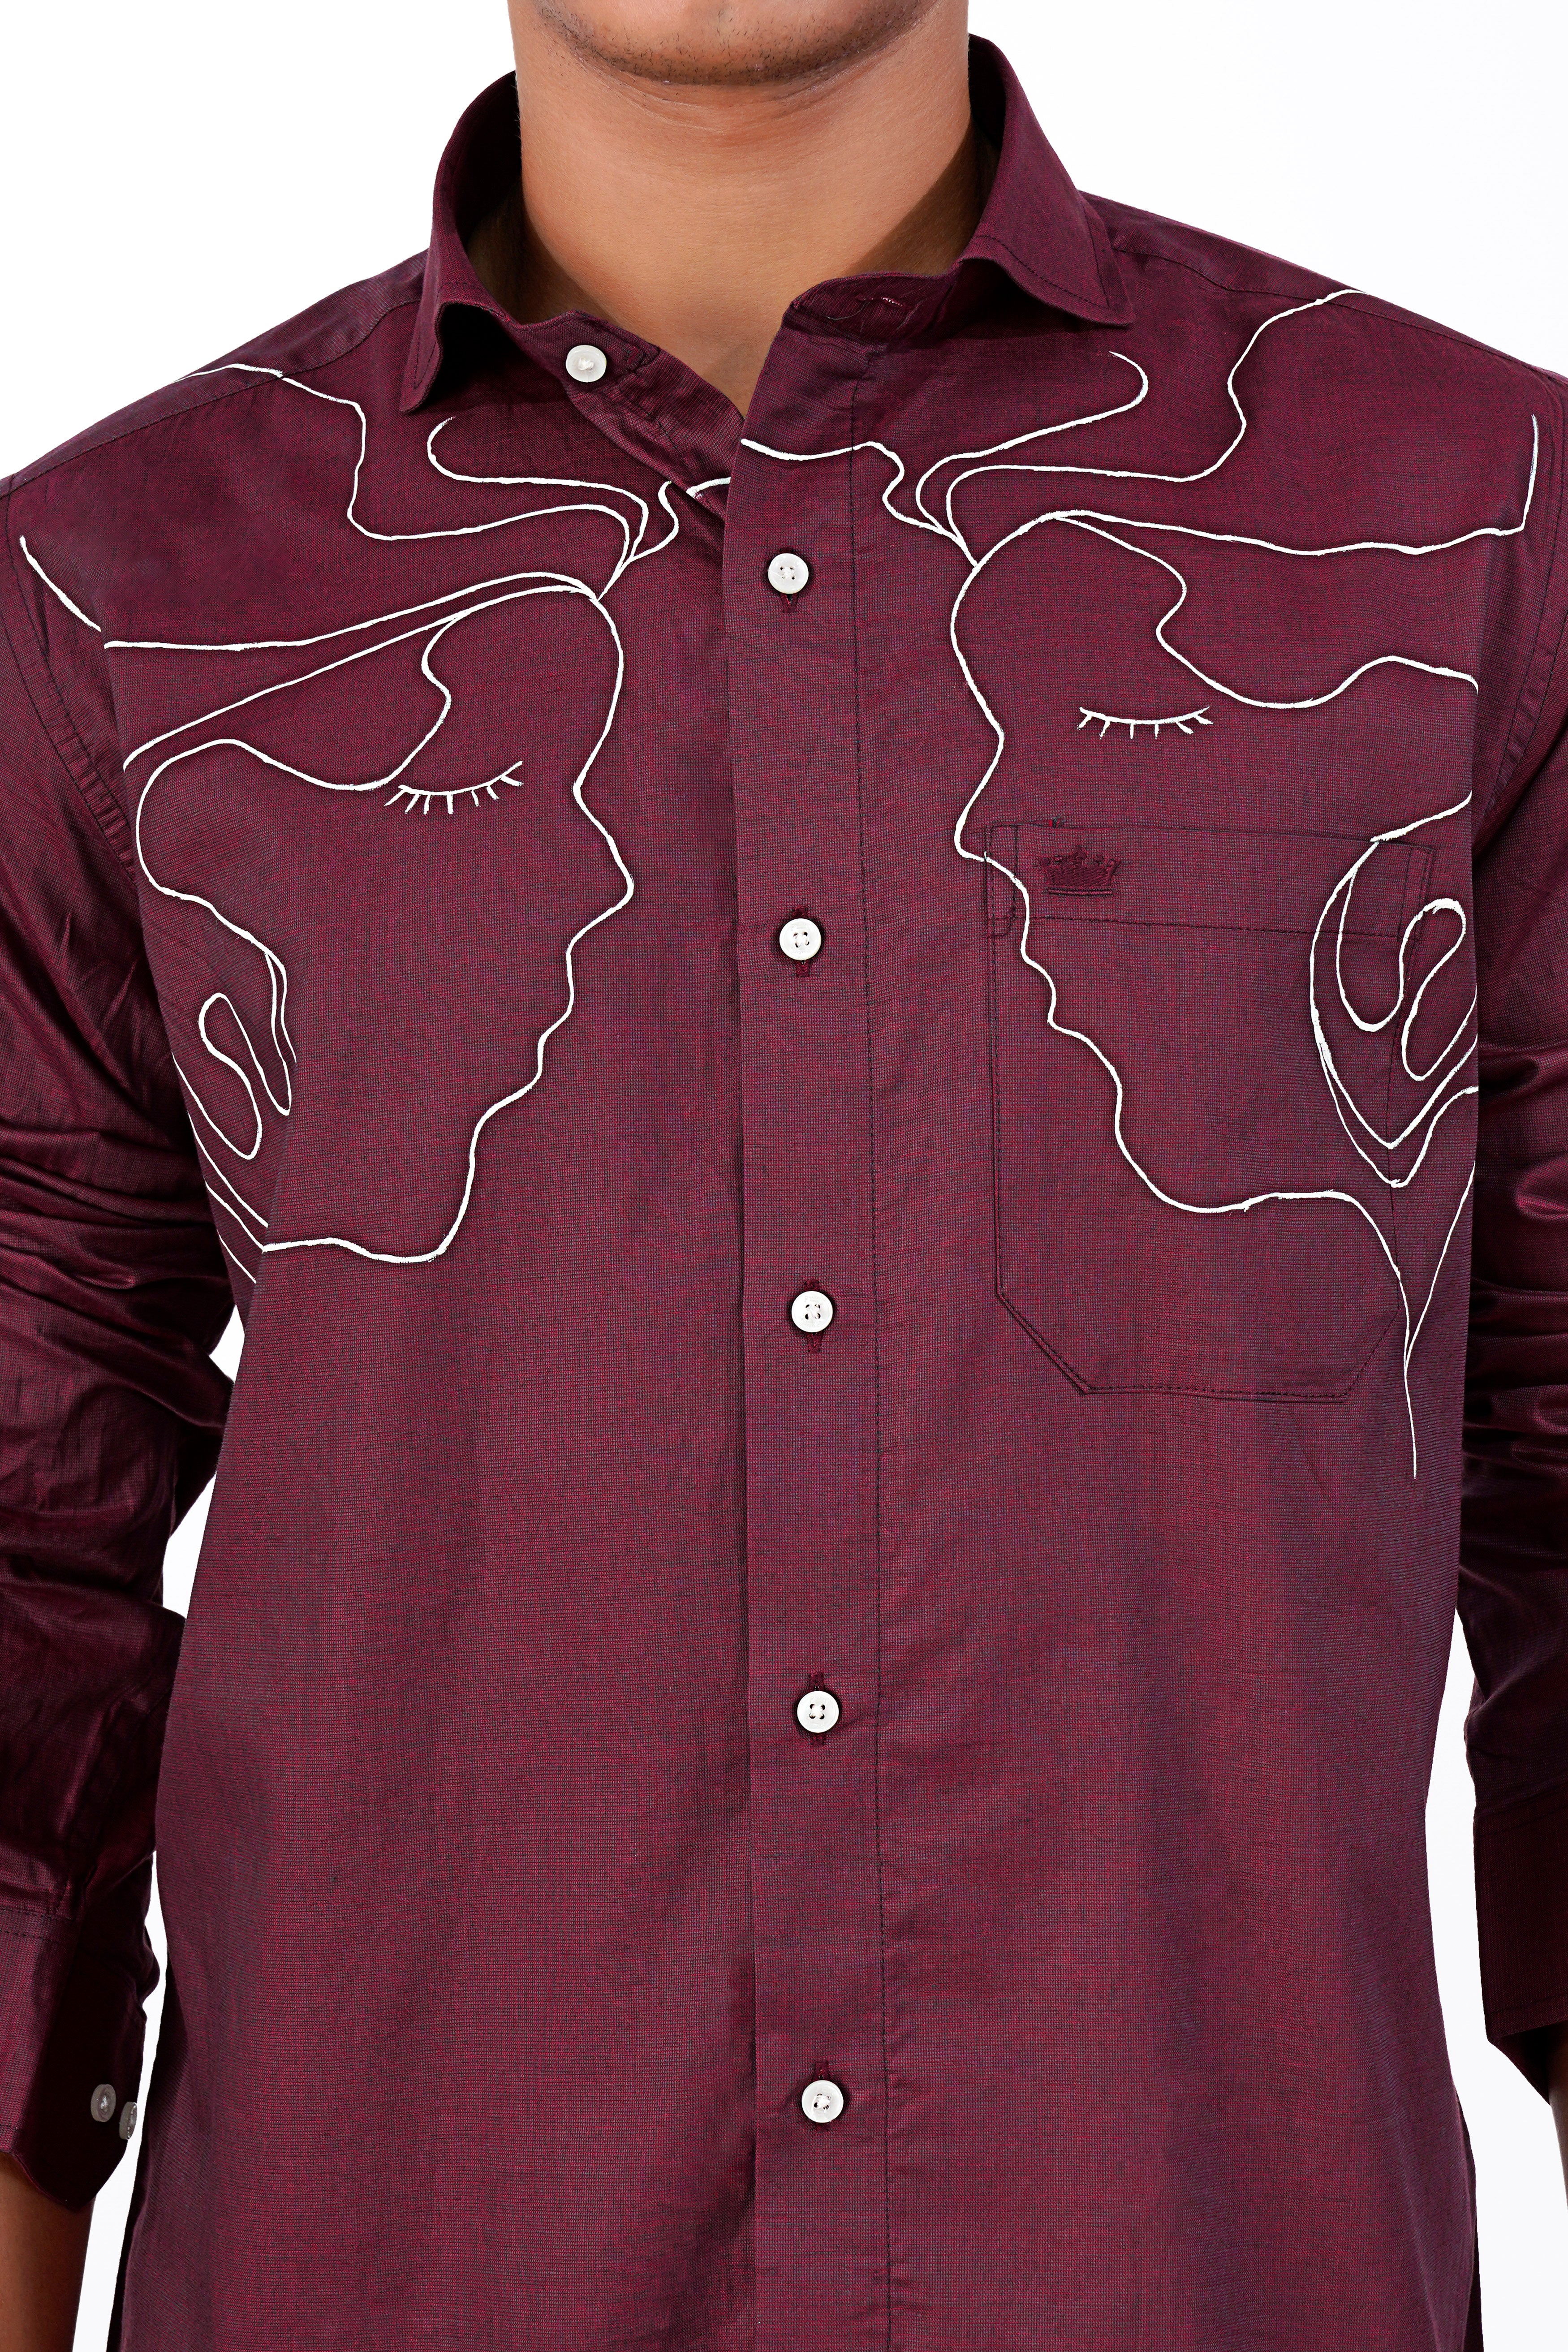 Wine Berry Face Like Hand Painted Chambray Designer Shirt 6481-CA-ART-38, 6481-CA-ART-H-38, 6481-CA-ART-39, 6481-CA-ART-H-39, 6481-CA-ART-40, 6481-CA-ART-H-40, 6481-CA-ART-42, 6481-CA-ART-H-42, 6481-CA-ART-44, 6481-CA-ART-H-44, 6481-CA-ART-46, 6481-CA-ART-H-46, 6481-CA-ART-48, 6481-CA-ART-H-48, 6481-CA-ART-50, 6481-CA-ART-H-50, 6481-CA-ART-52, 6481-CA-ART-H-52